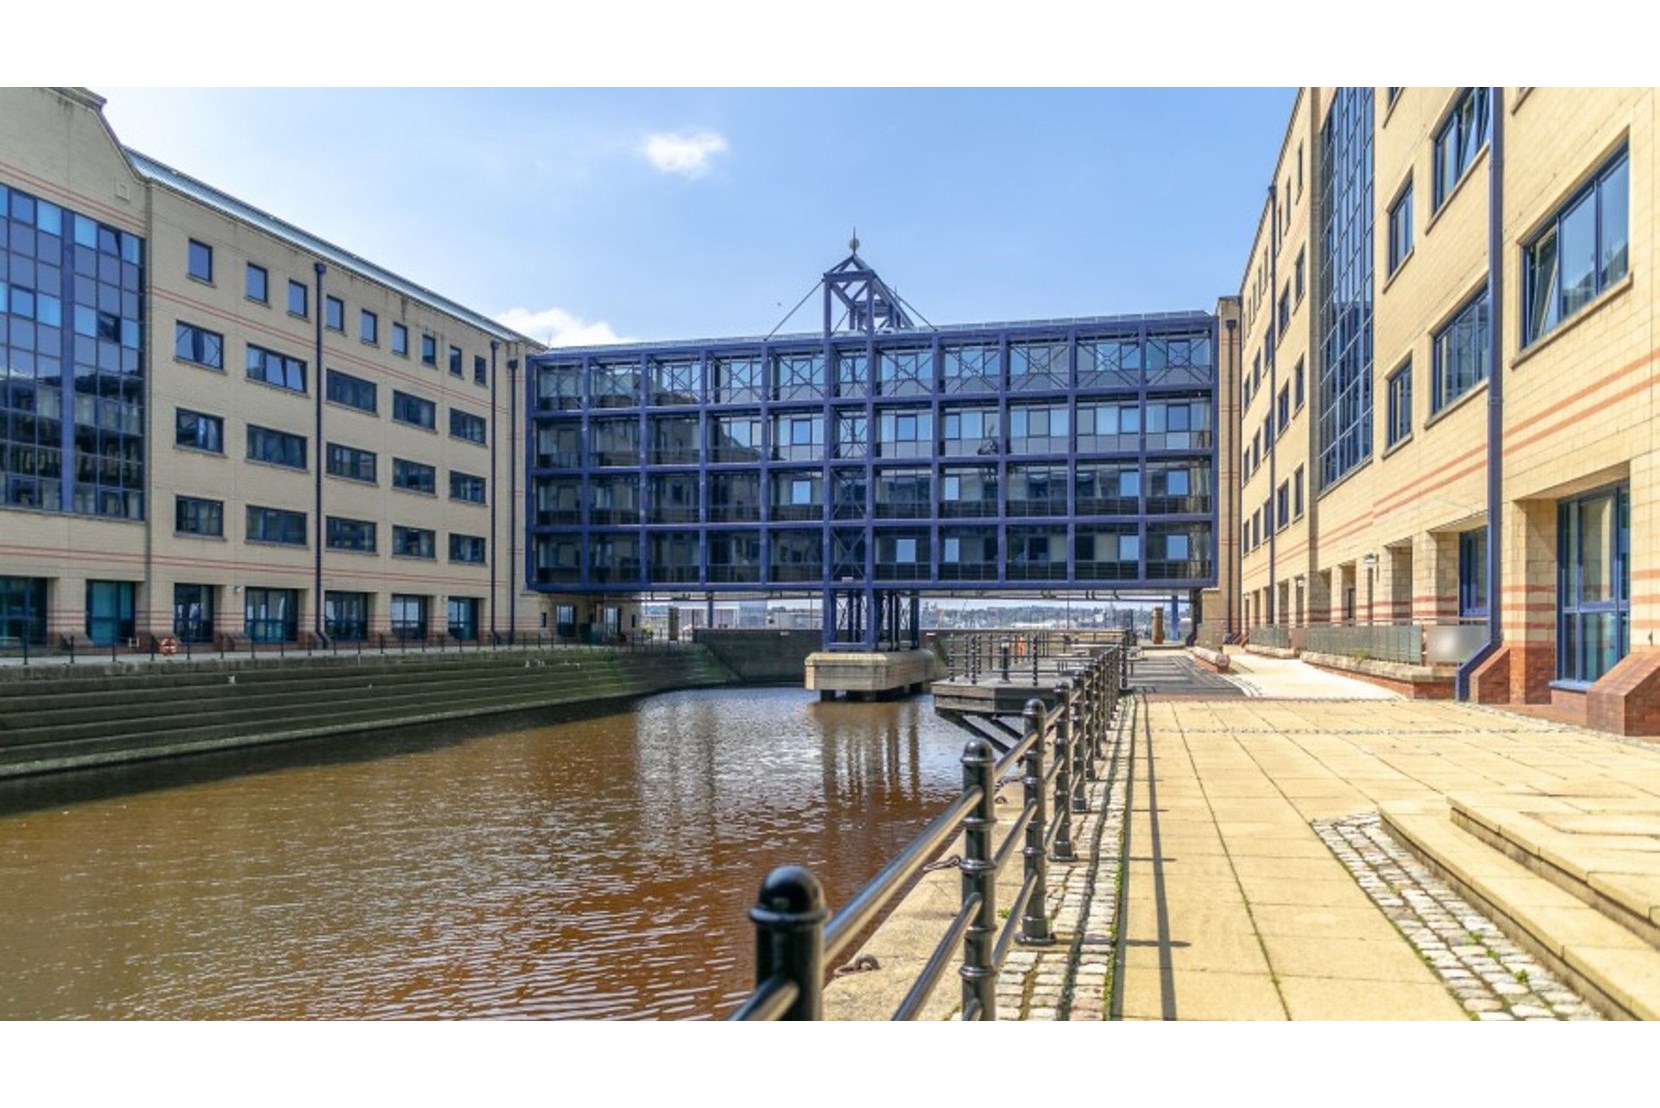 Apartments to Rent by Allsop at The Keel, Liverpool, L3, development panoramic canalside